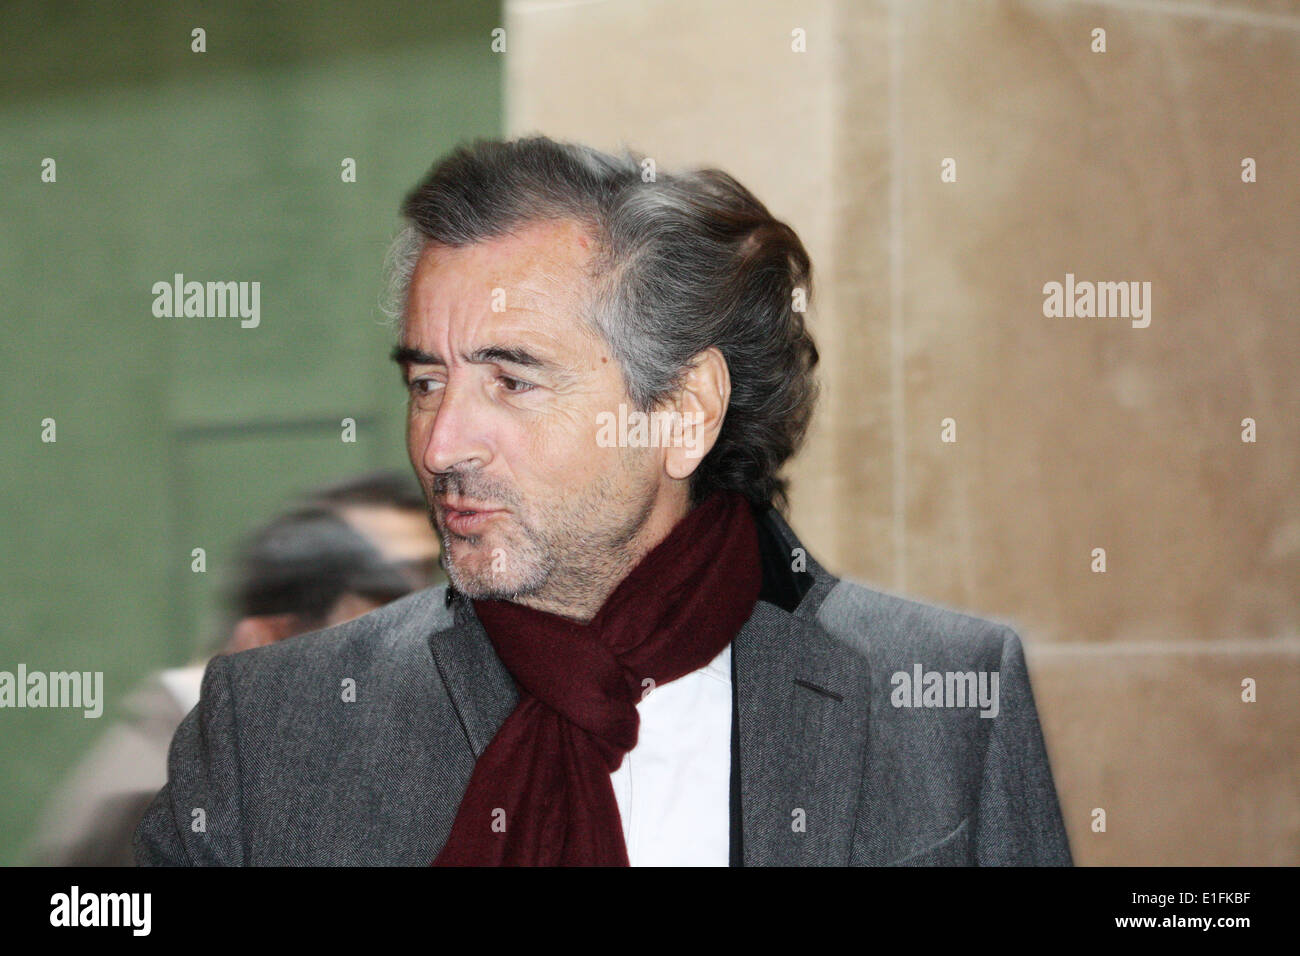 Bernard Henri Levy, french philosopher and writer,during the trial of ...